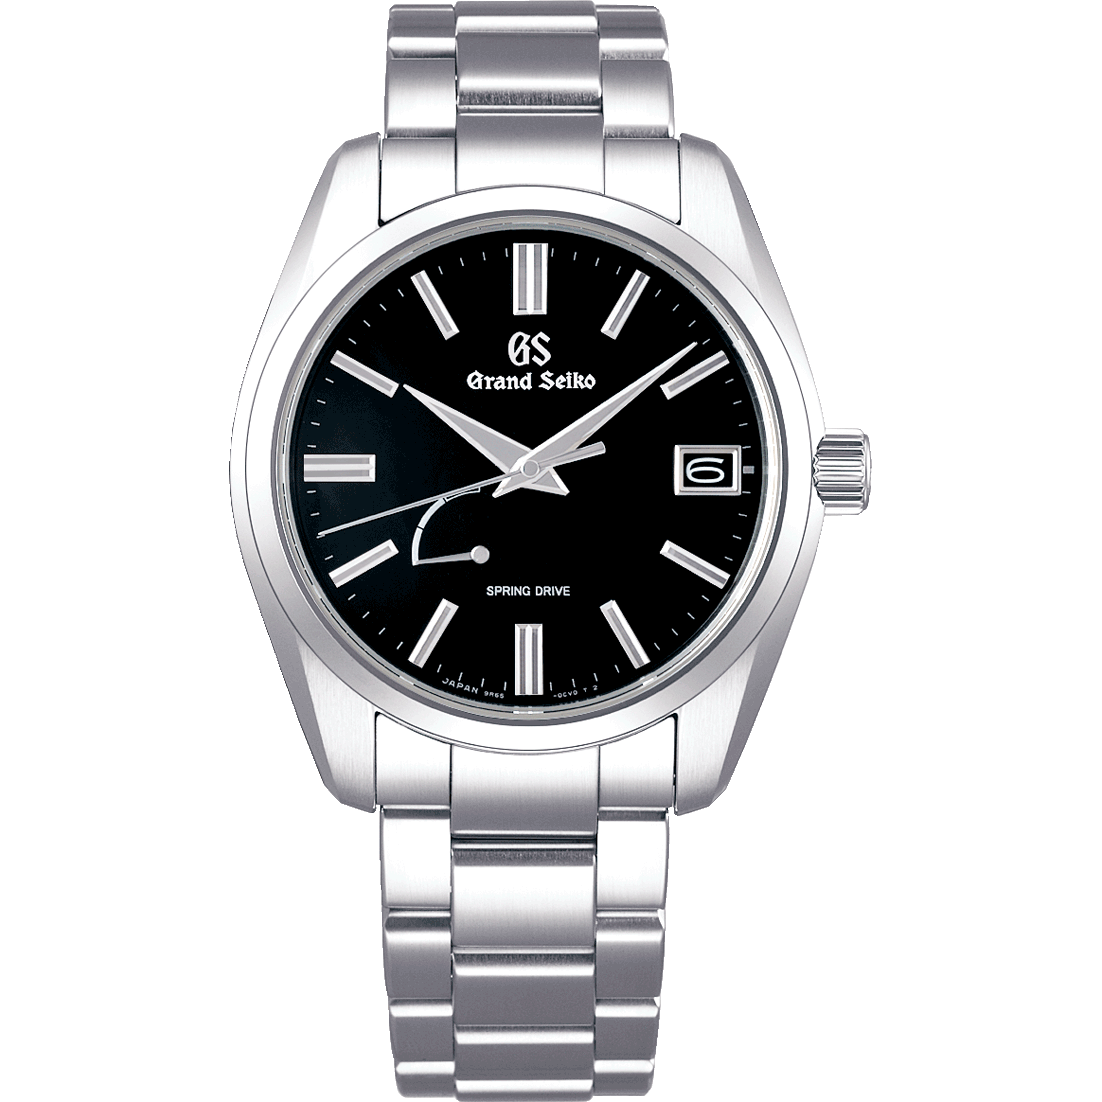 Kapel Andesbjergene barriere Grand Seiko Spring Drive Black SBGA467 Watch – Grand Seiko Official Boutique